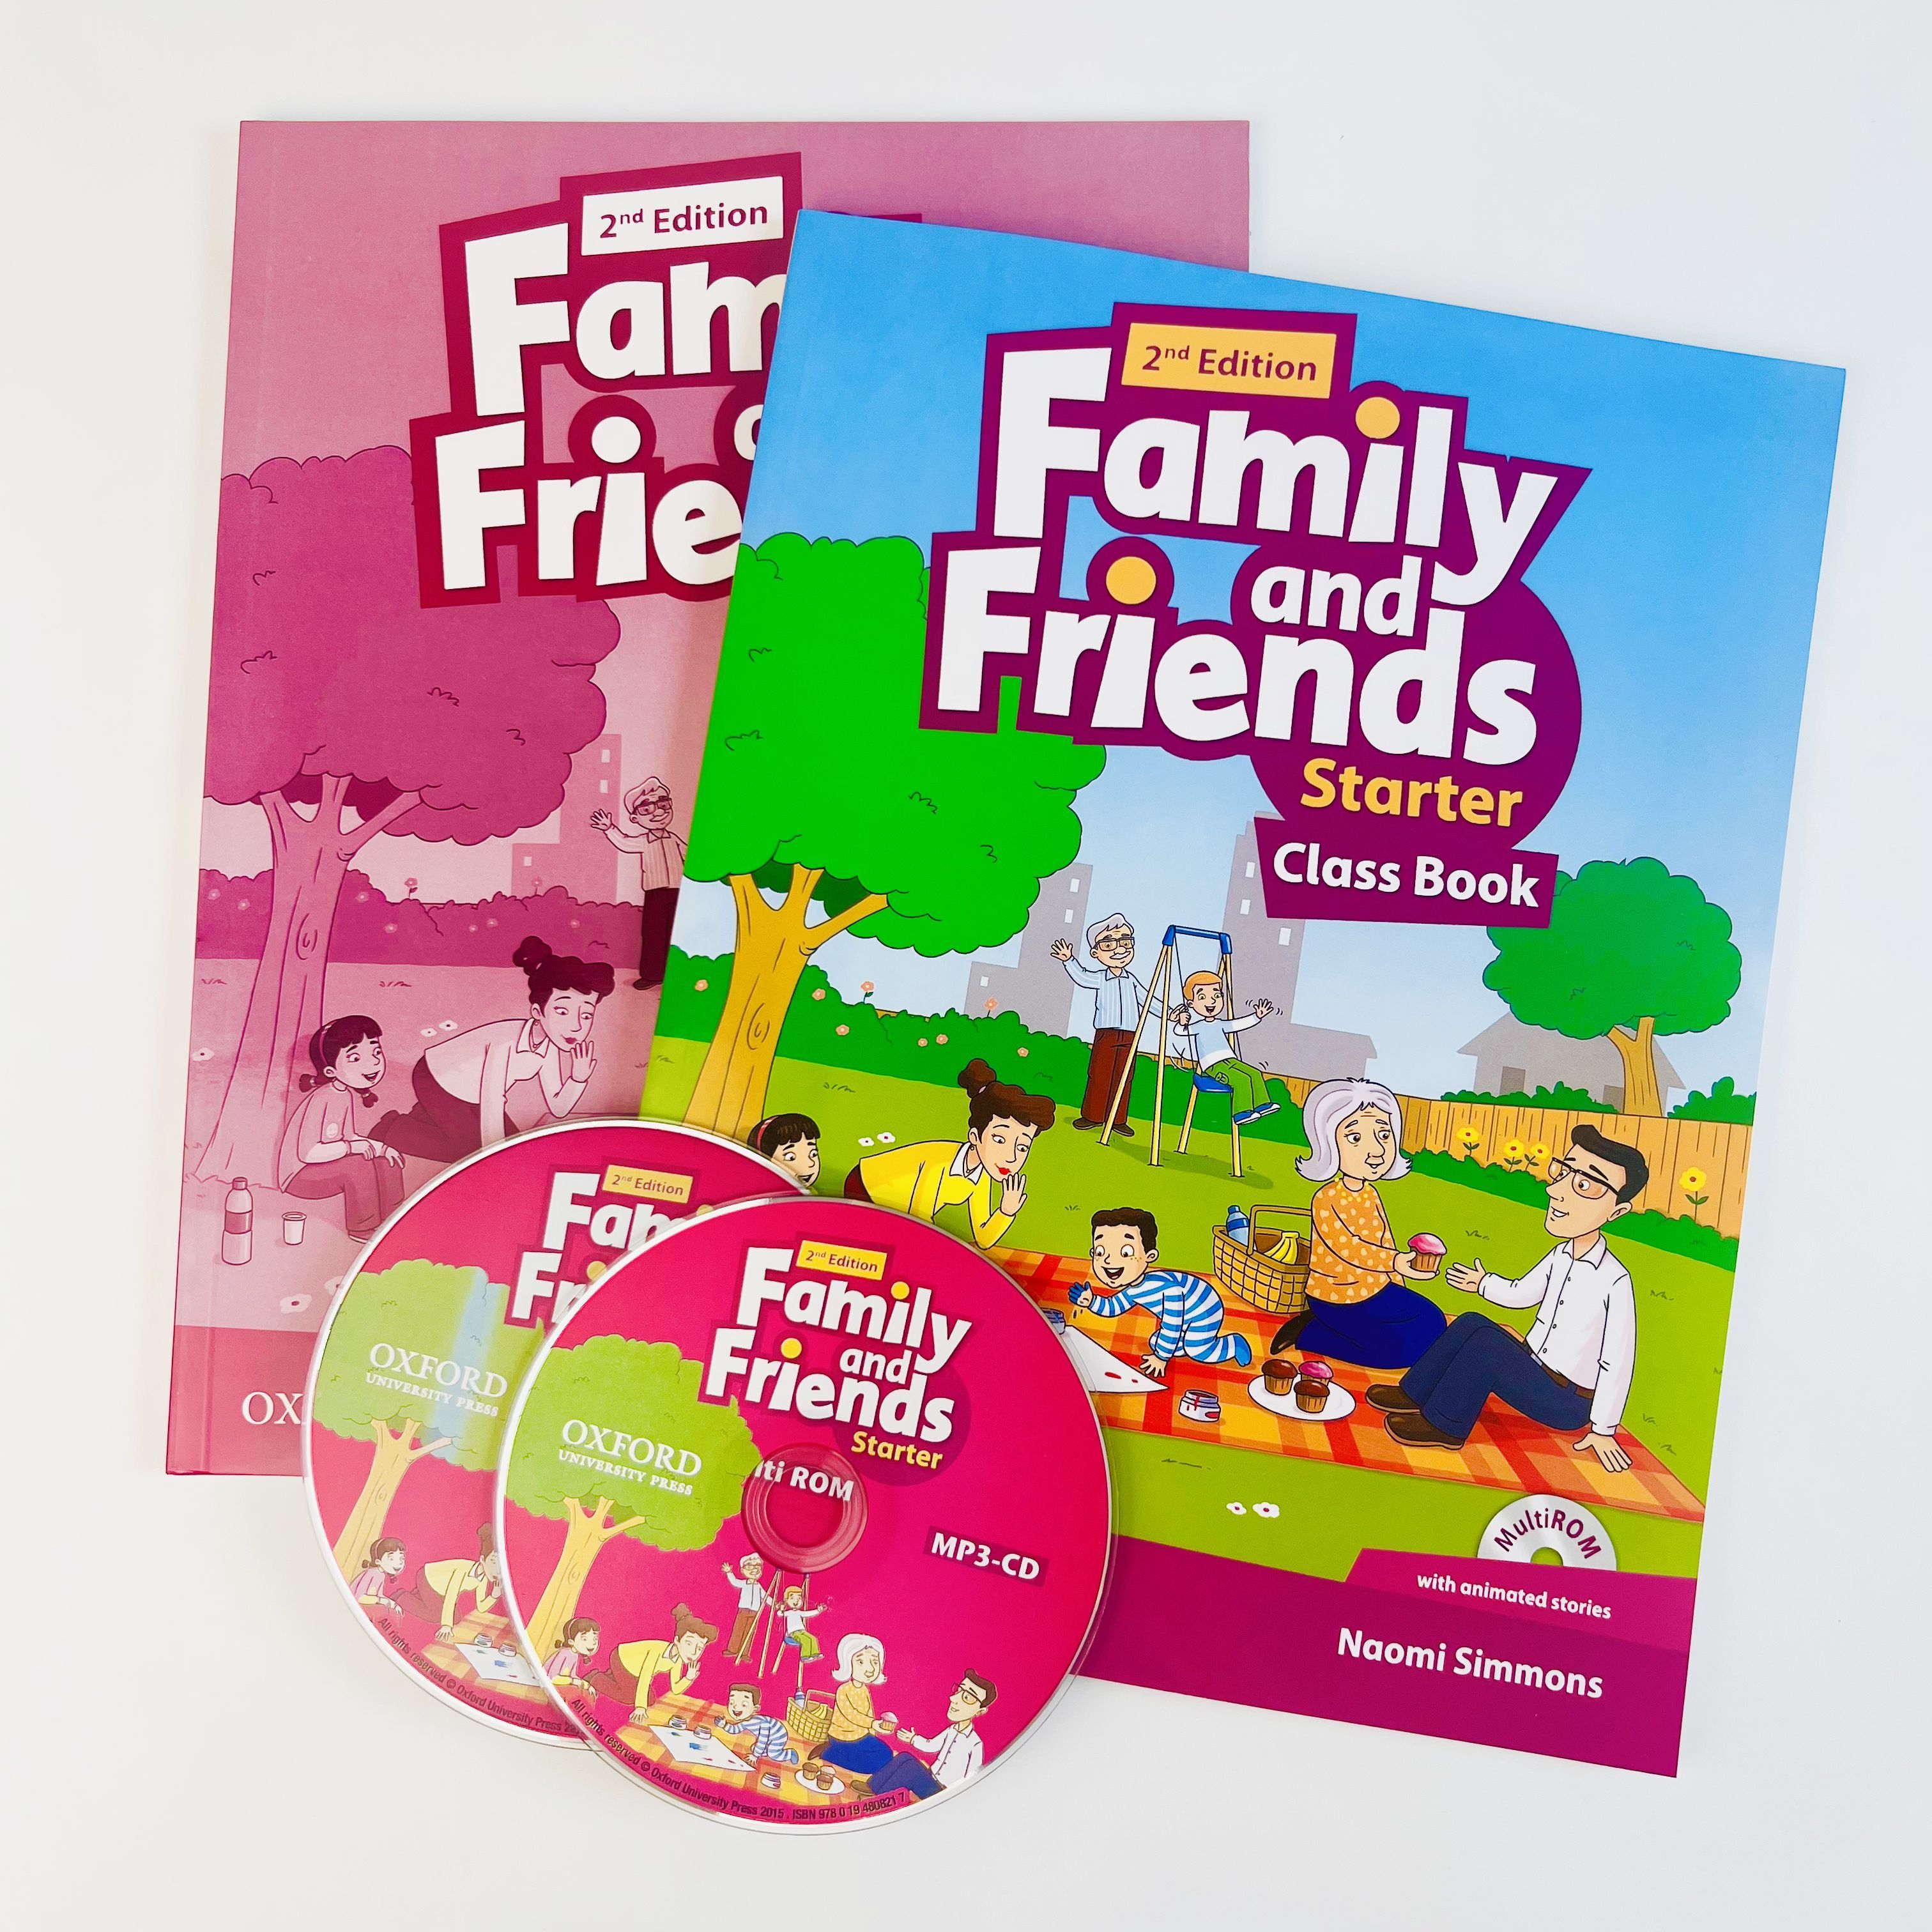 Family and friends starter book. Family and friends: Starter. Family and friends Starter class book. Starter учебник. Family and friends 1 Starter.